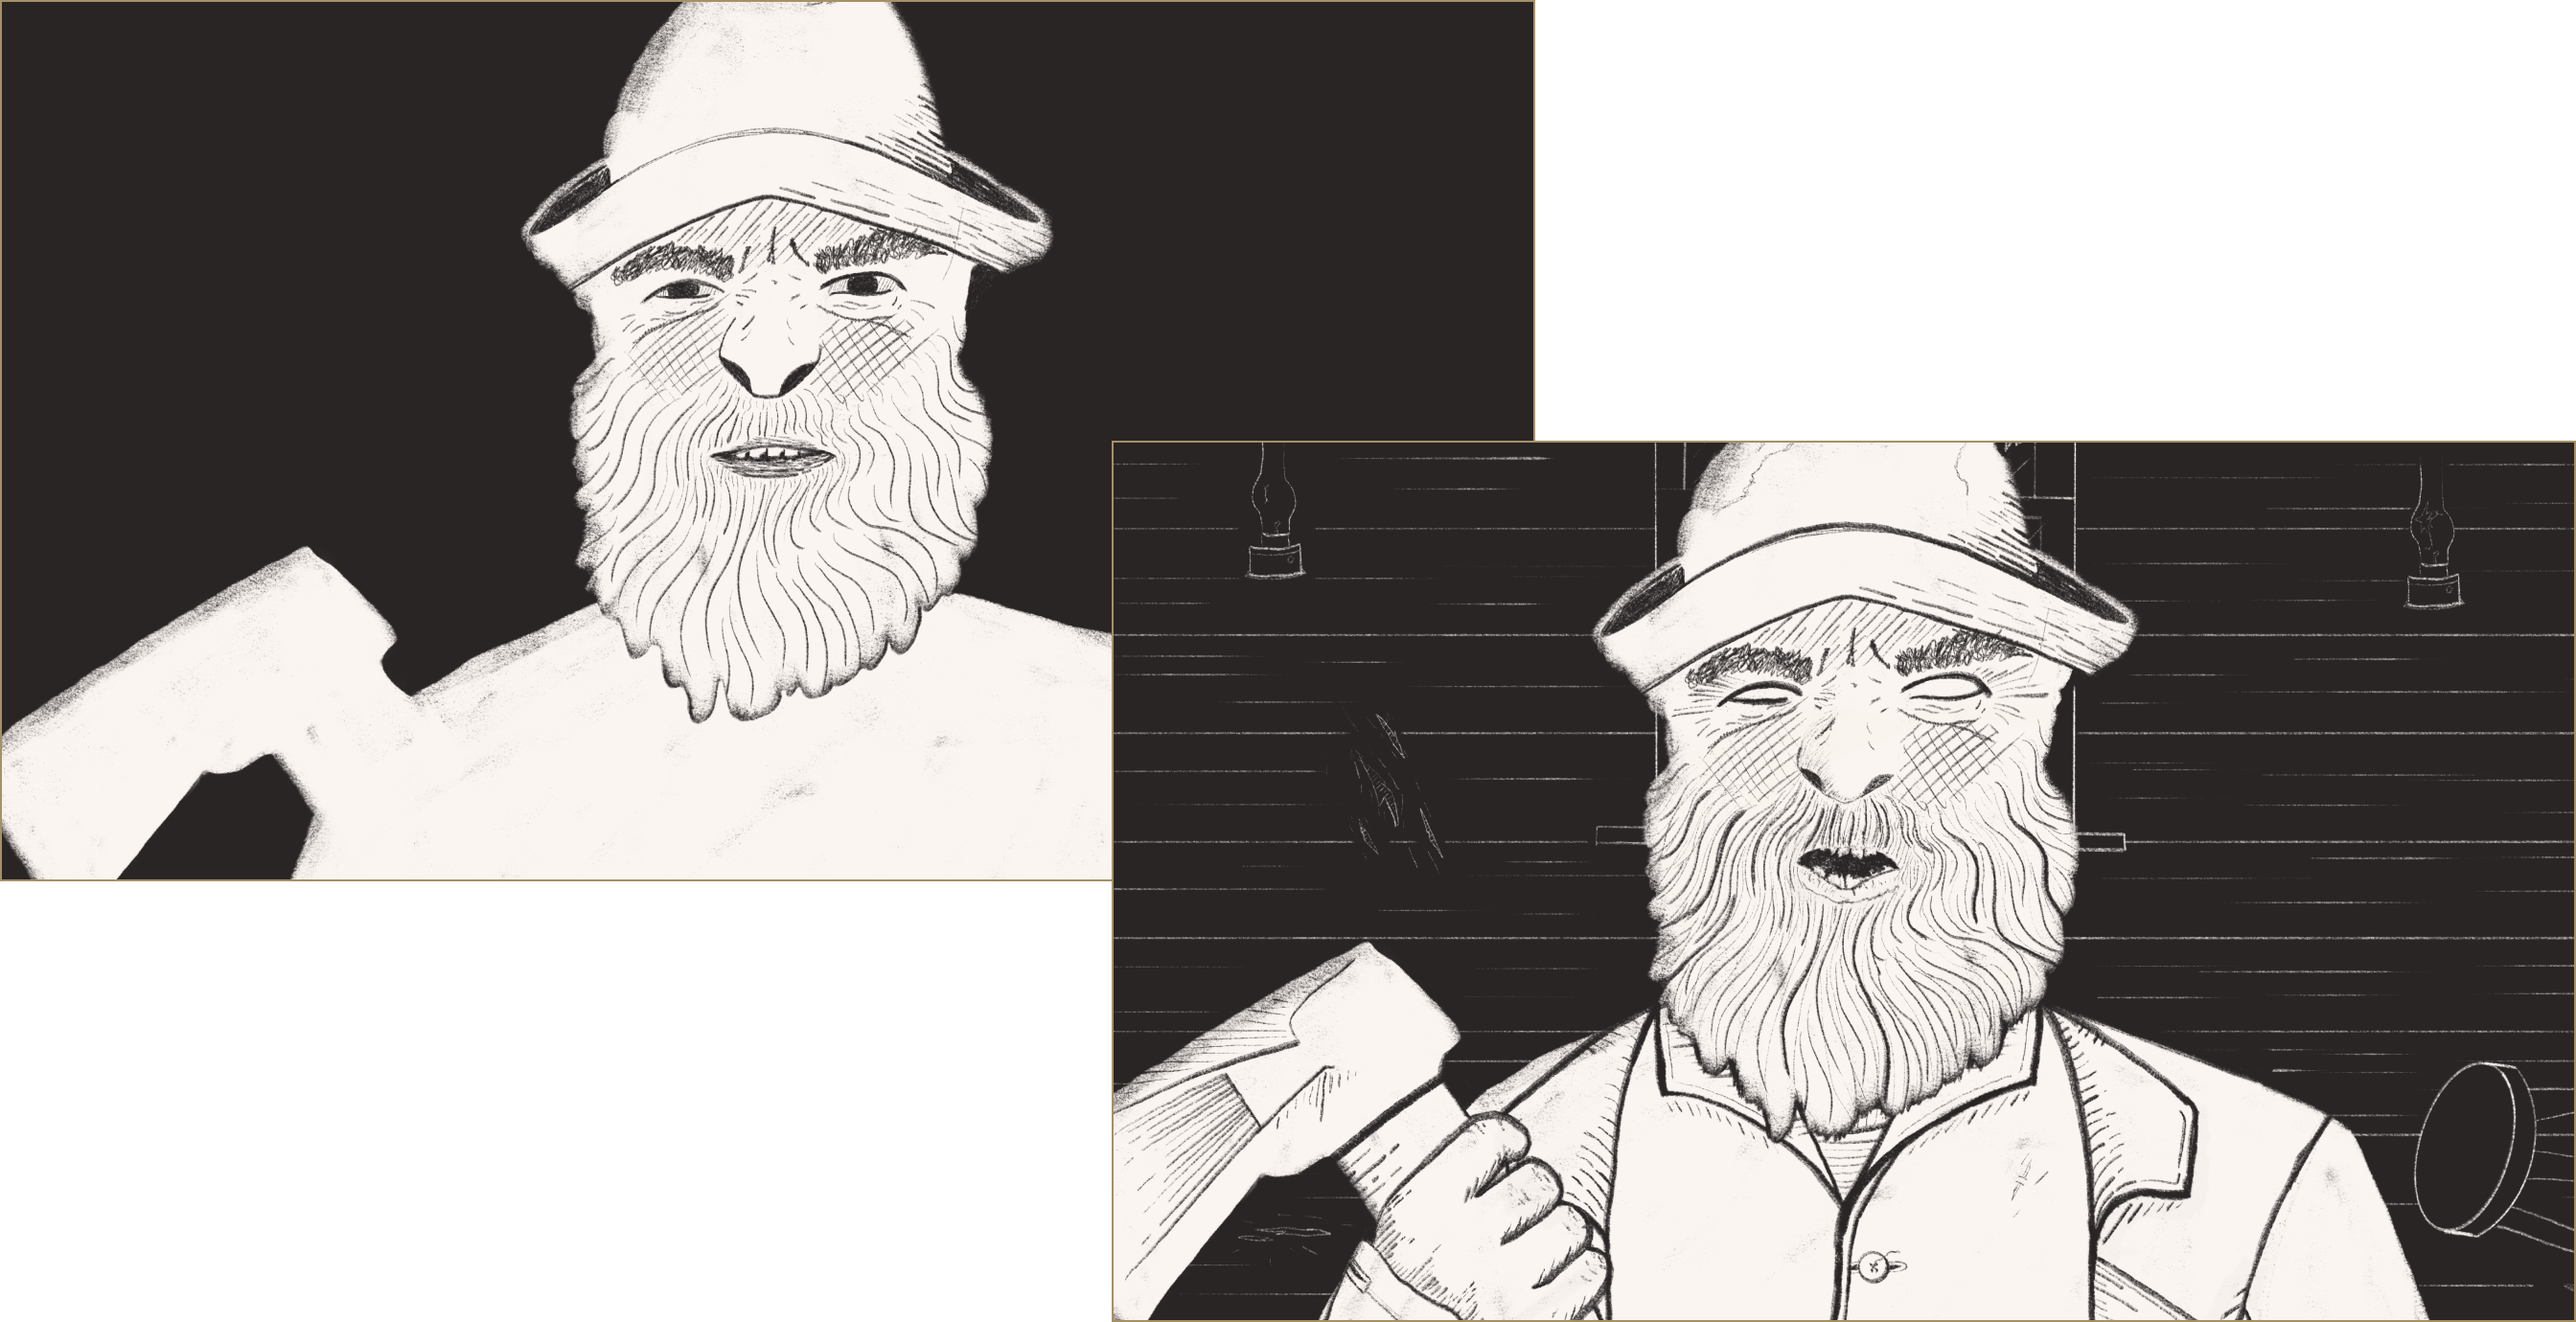 two images showing the progression of the character design for the lighthouse keeper